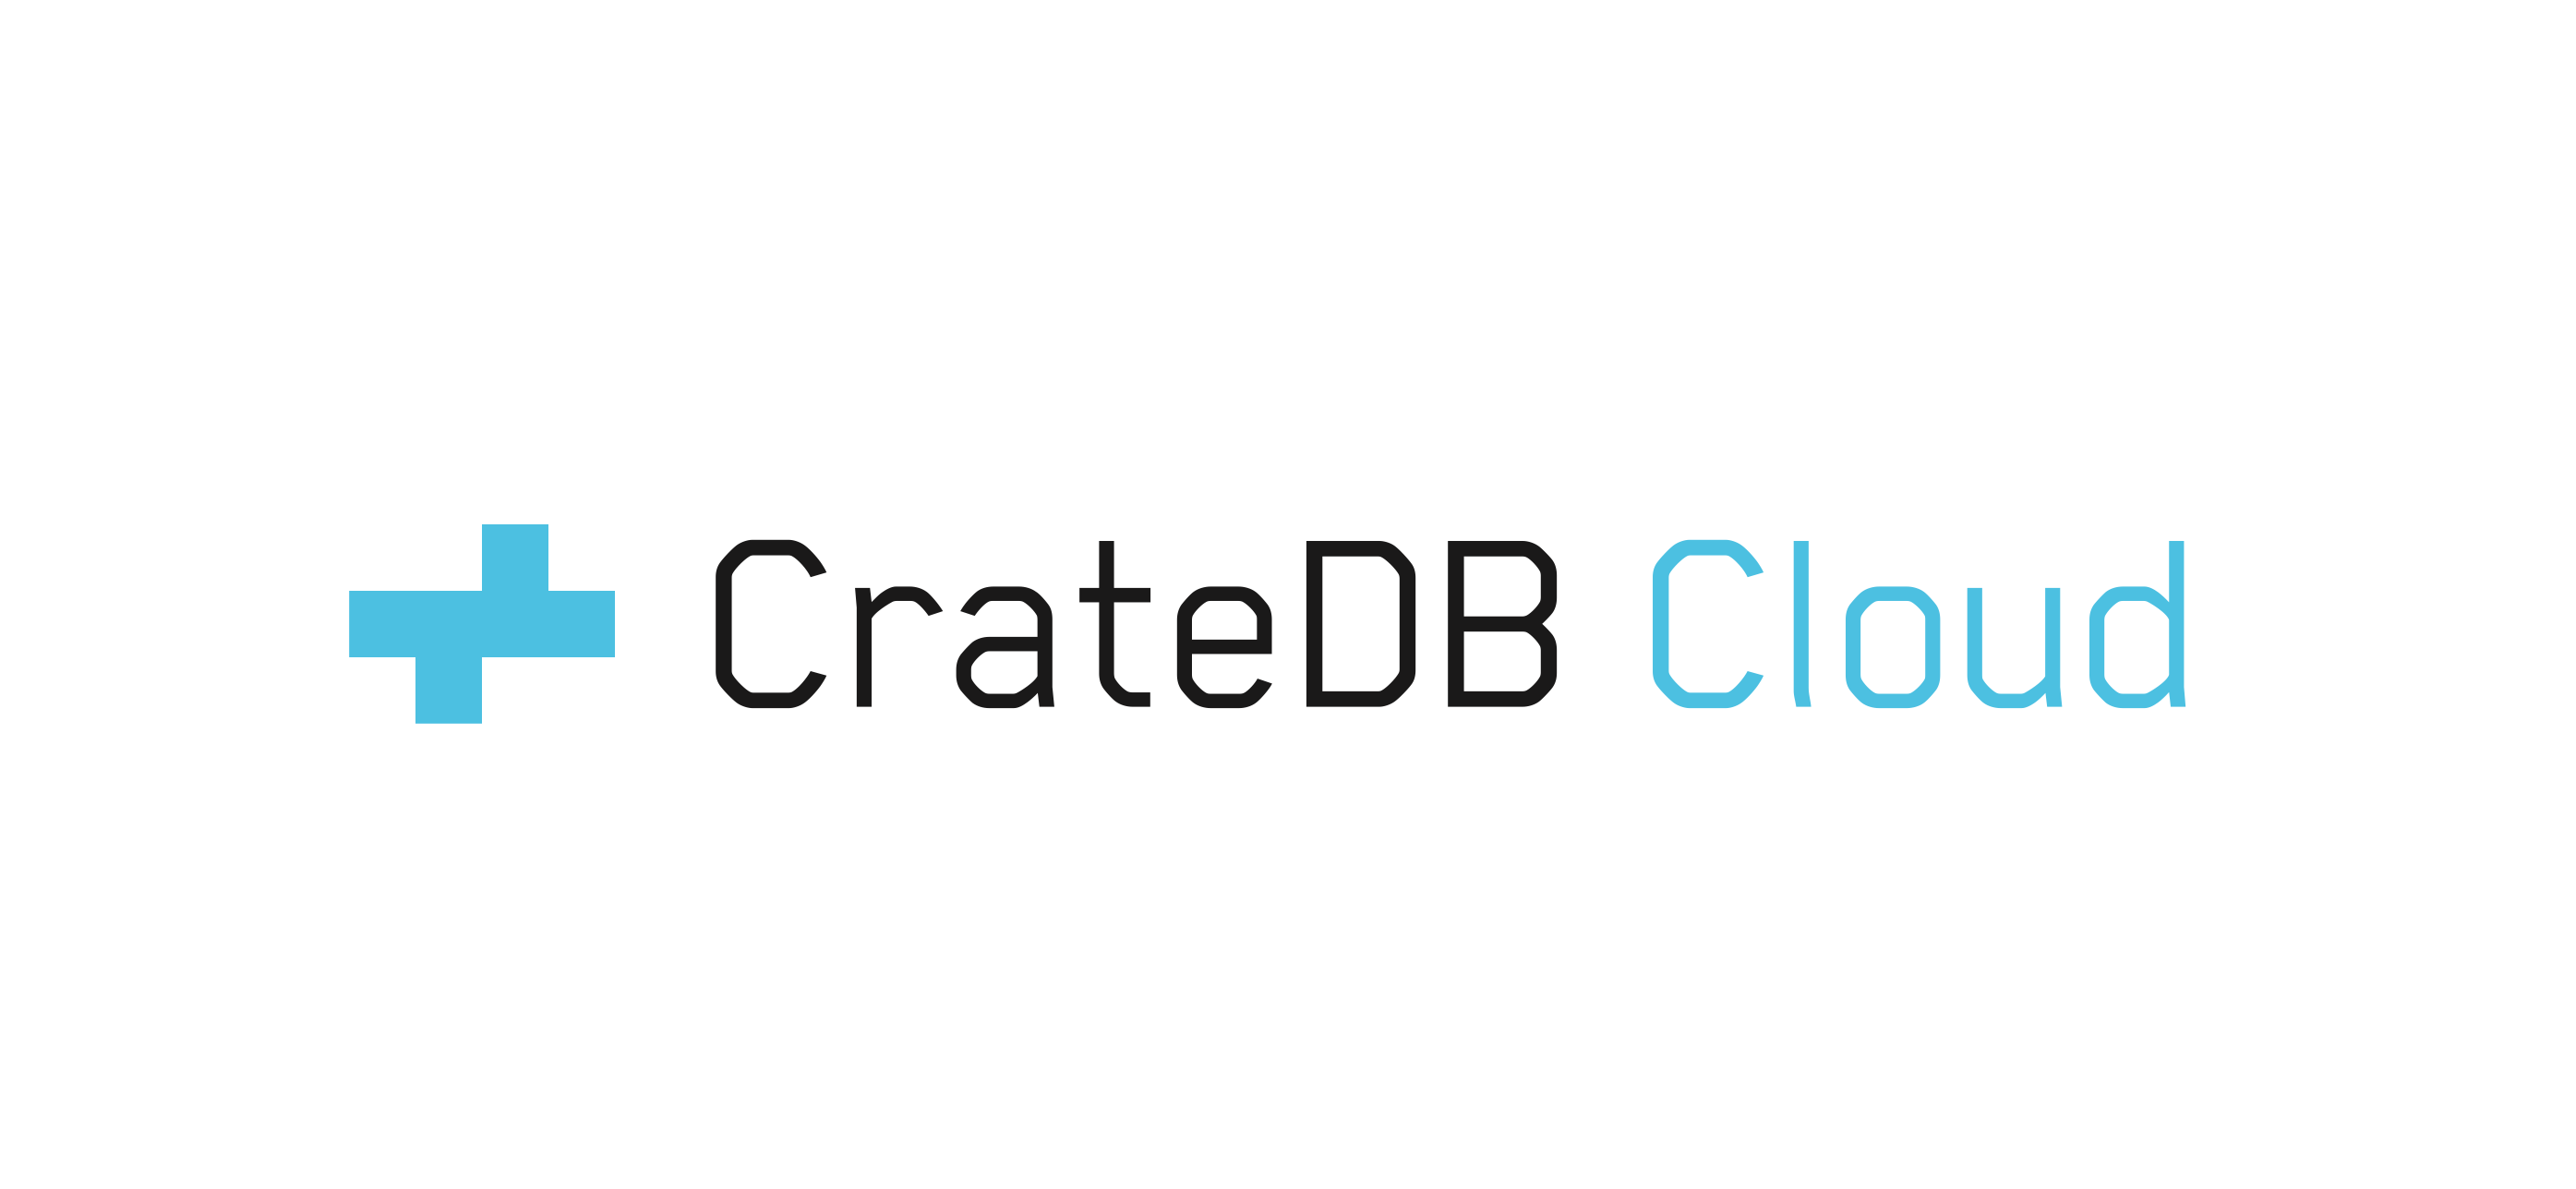 Announcing the CrateDB Cloud free trial